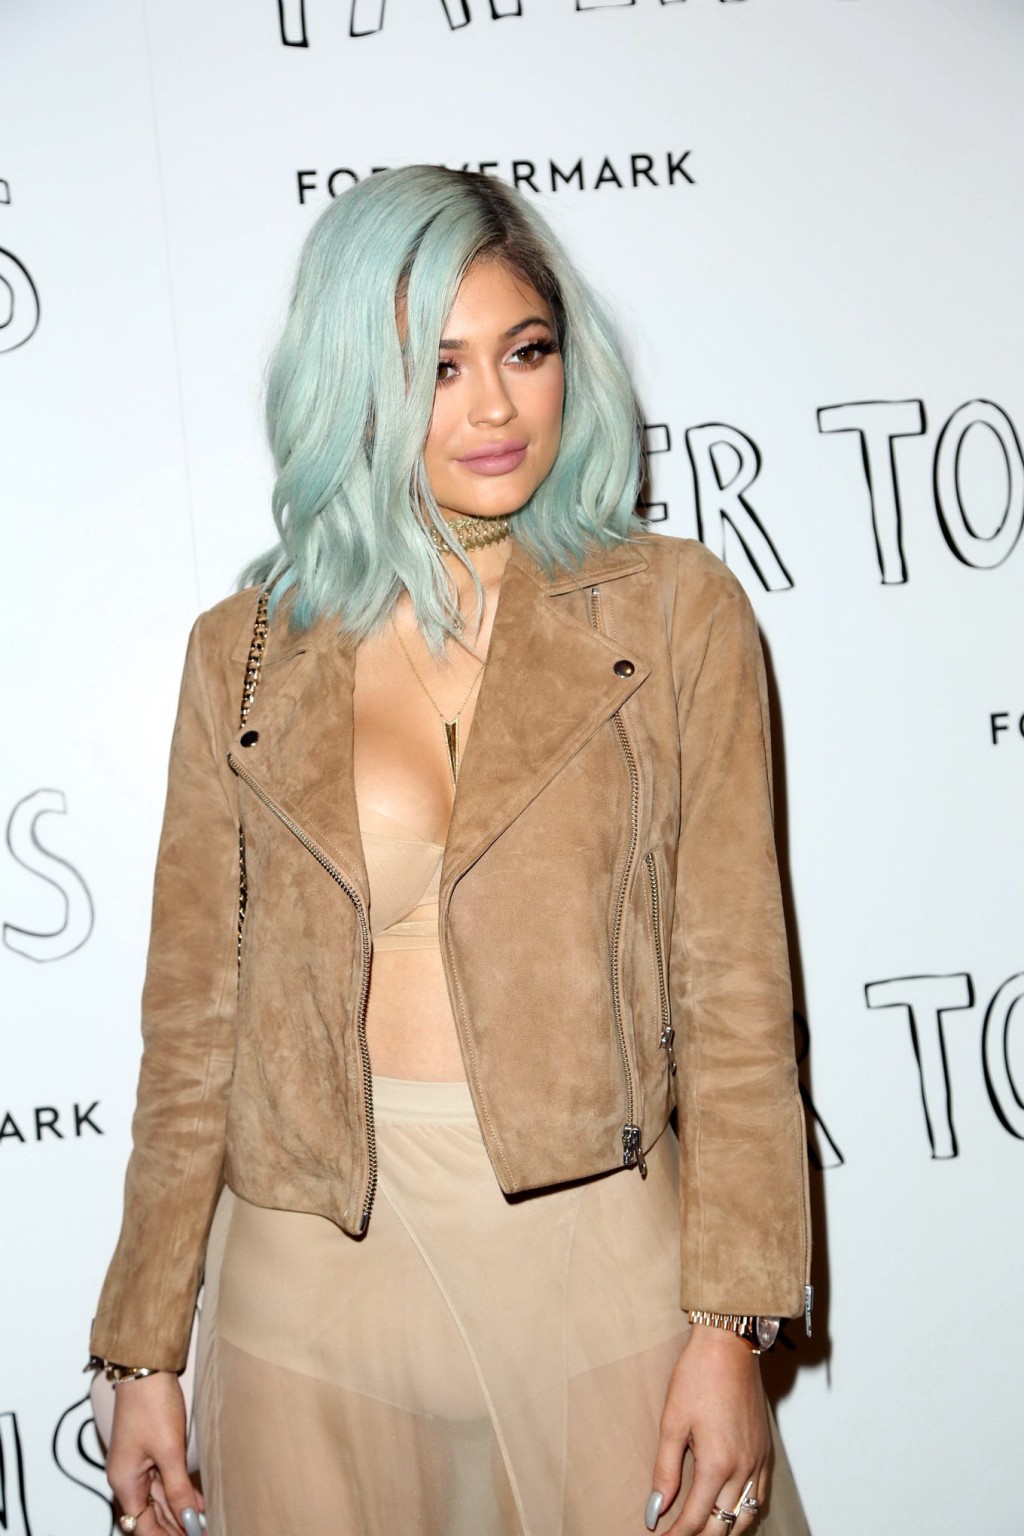 Kylie Jenner busty wearing crop top  see through skirt at Paper  #75157878